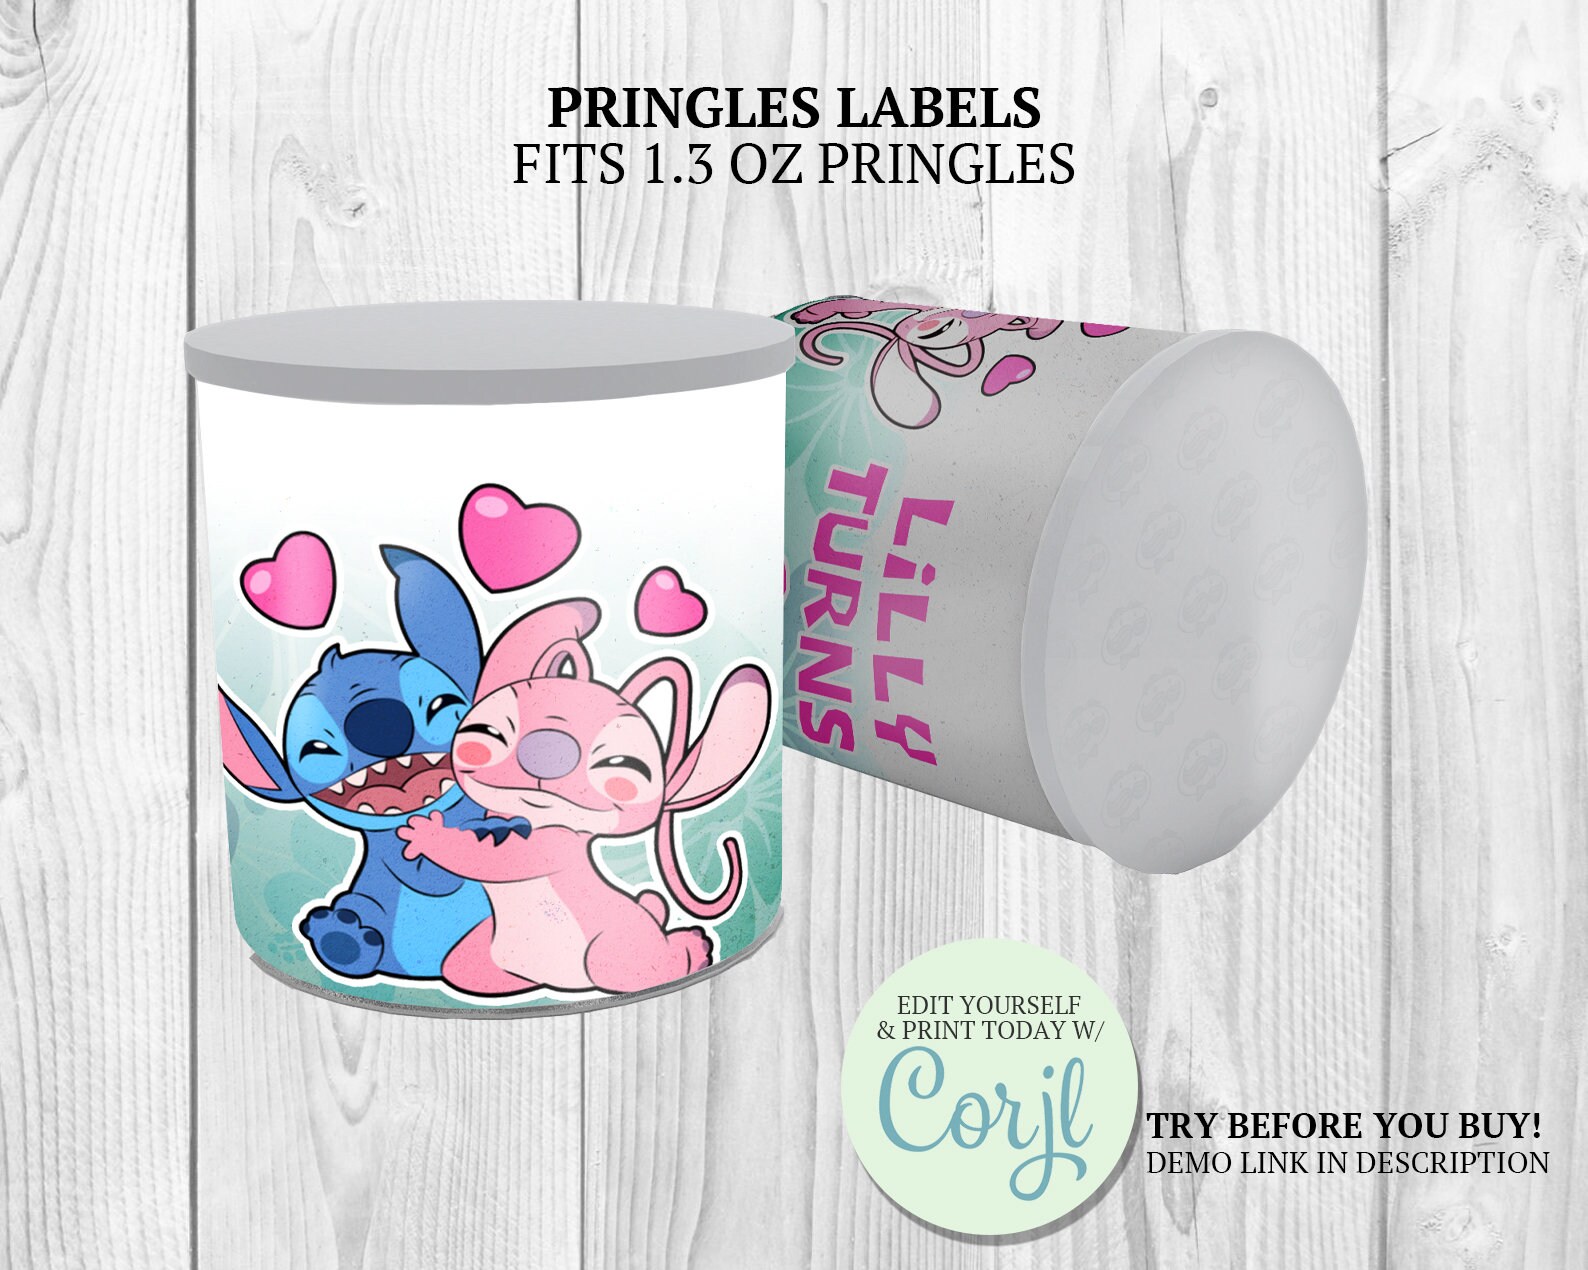 Lilo Stitch Party Templates, Lilo & Stitch Birthday Decor, Party Favors,  Goodie Bag Labels, Fruit Snacks, Cupcake Toppers, Pringles Label 